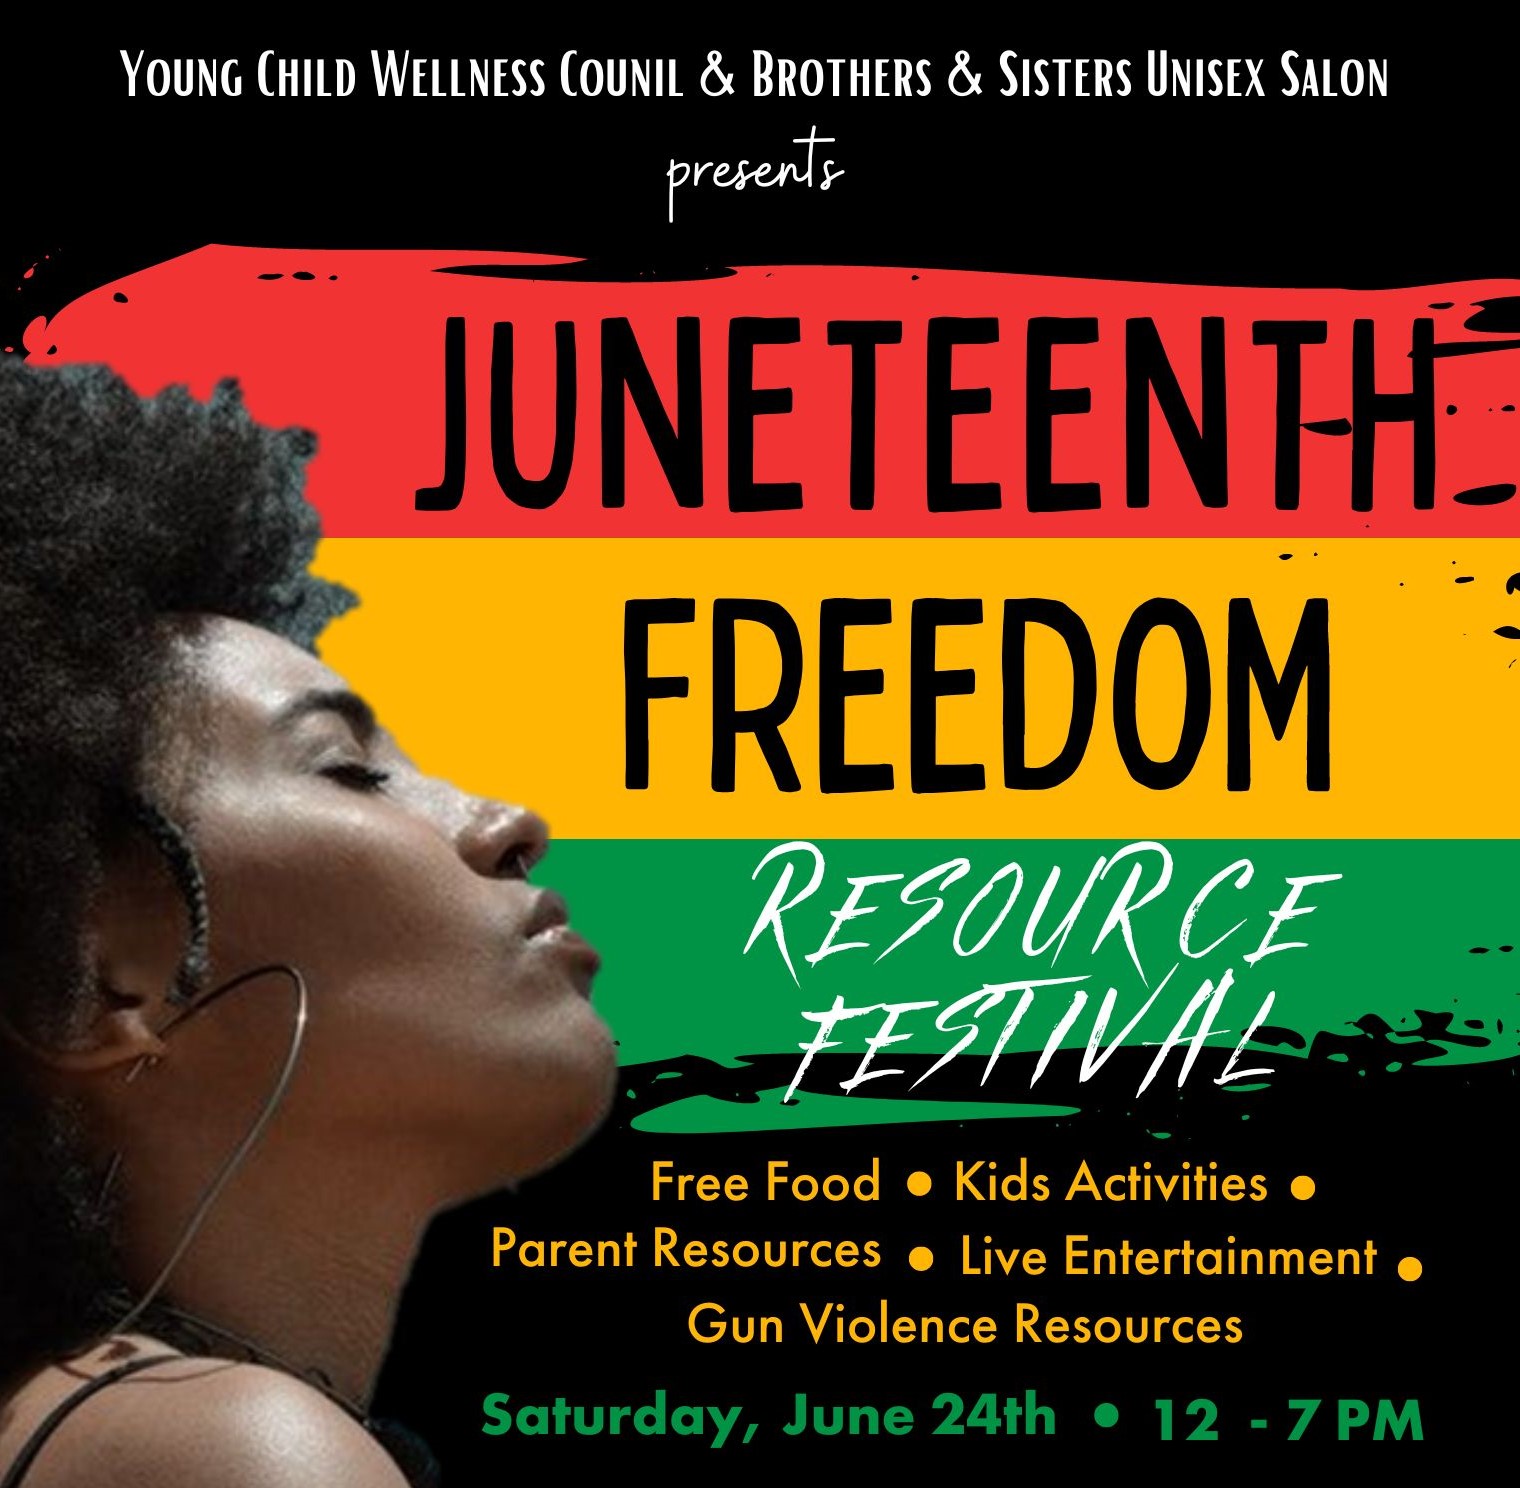 Juneteenth Freedom Resource Festival Overview